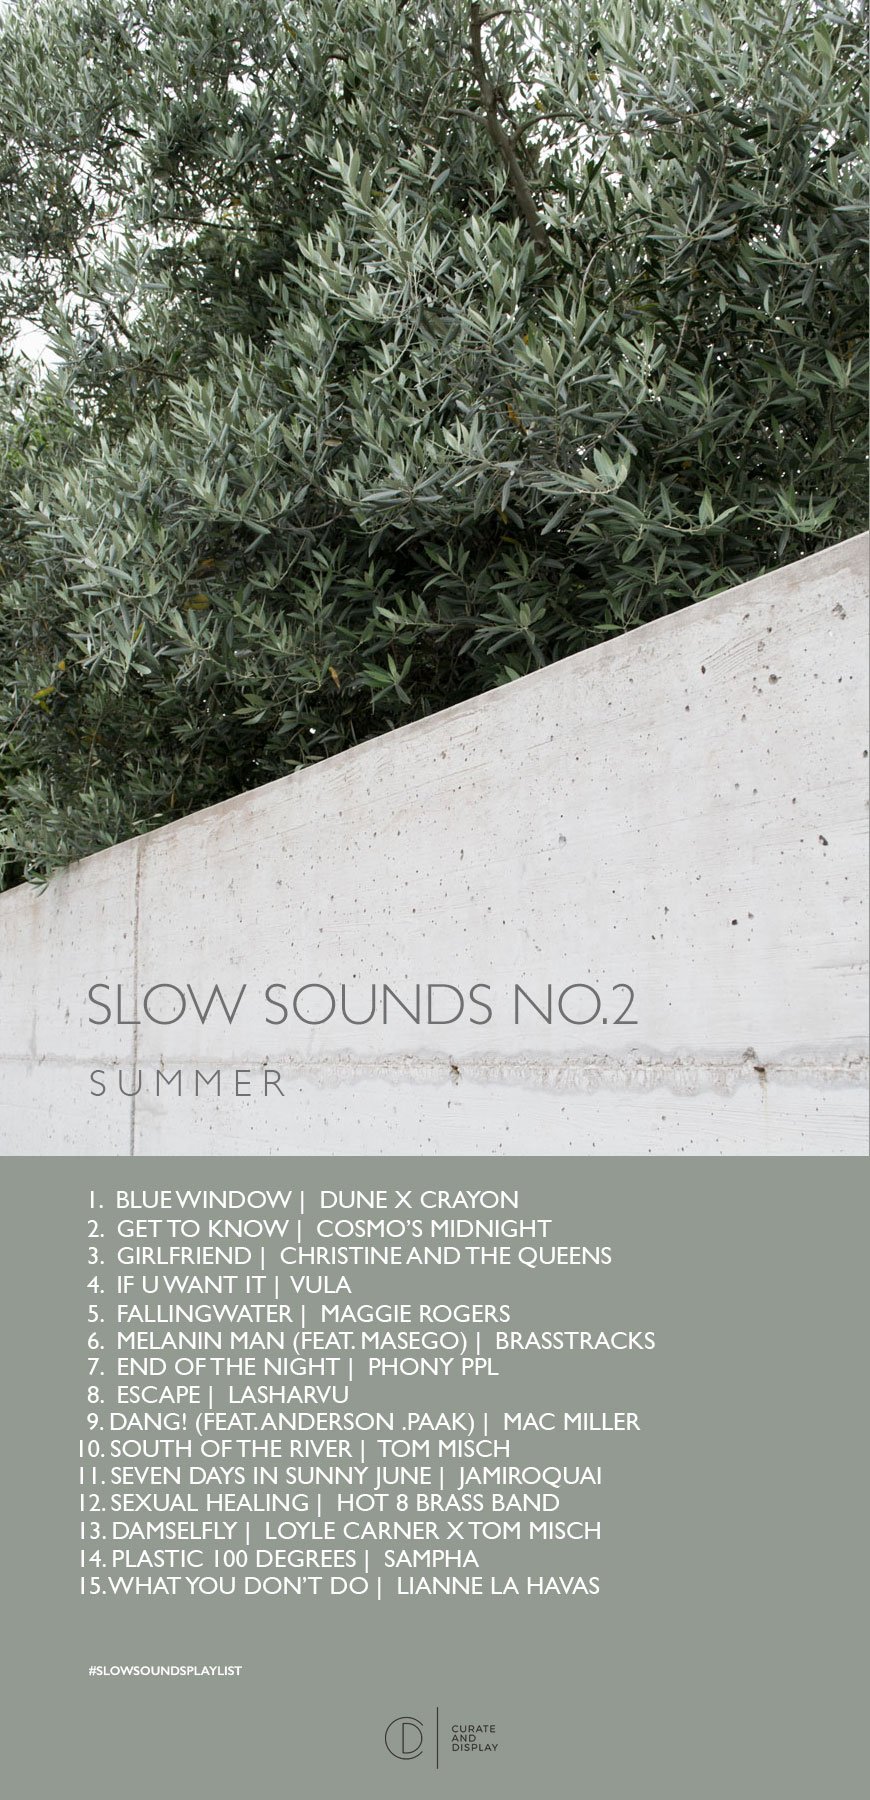 slow sounds no2 summer playlist with olive trees and concrete walls